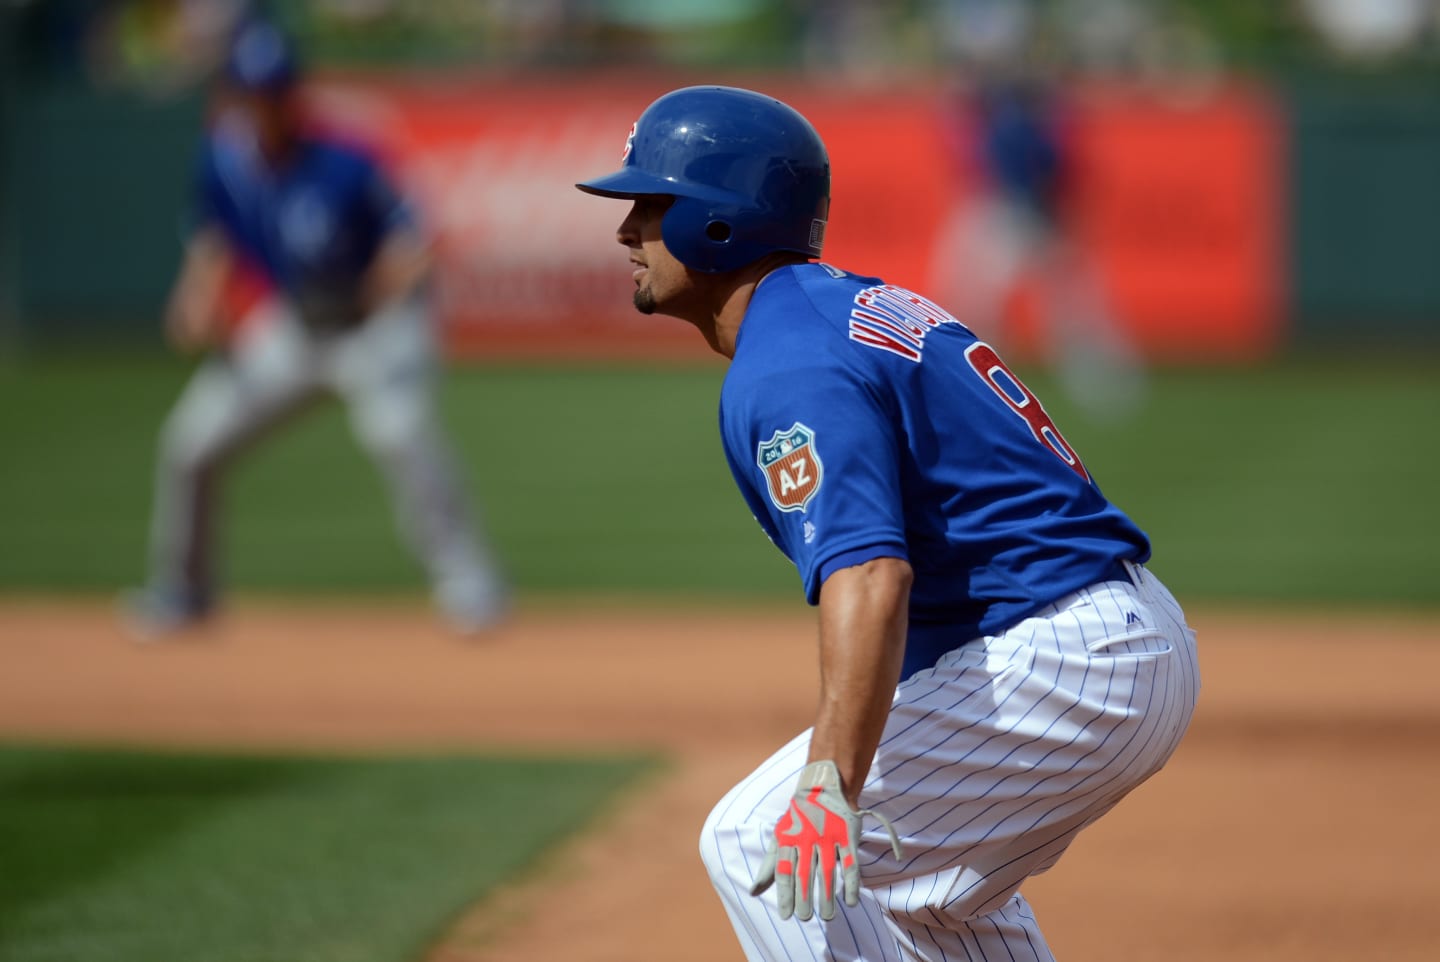 Shane Victorino not giving up on baseball with the Iowa Cubs